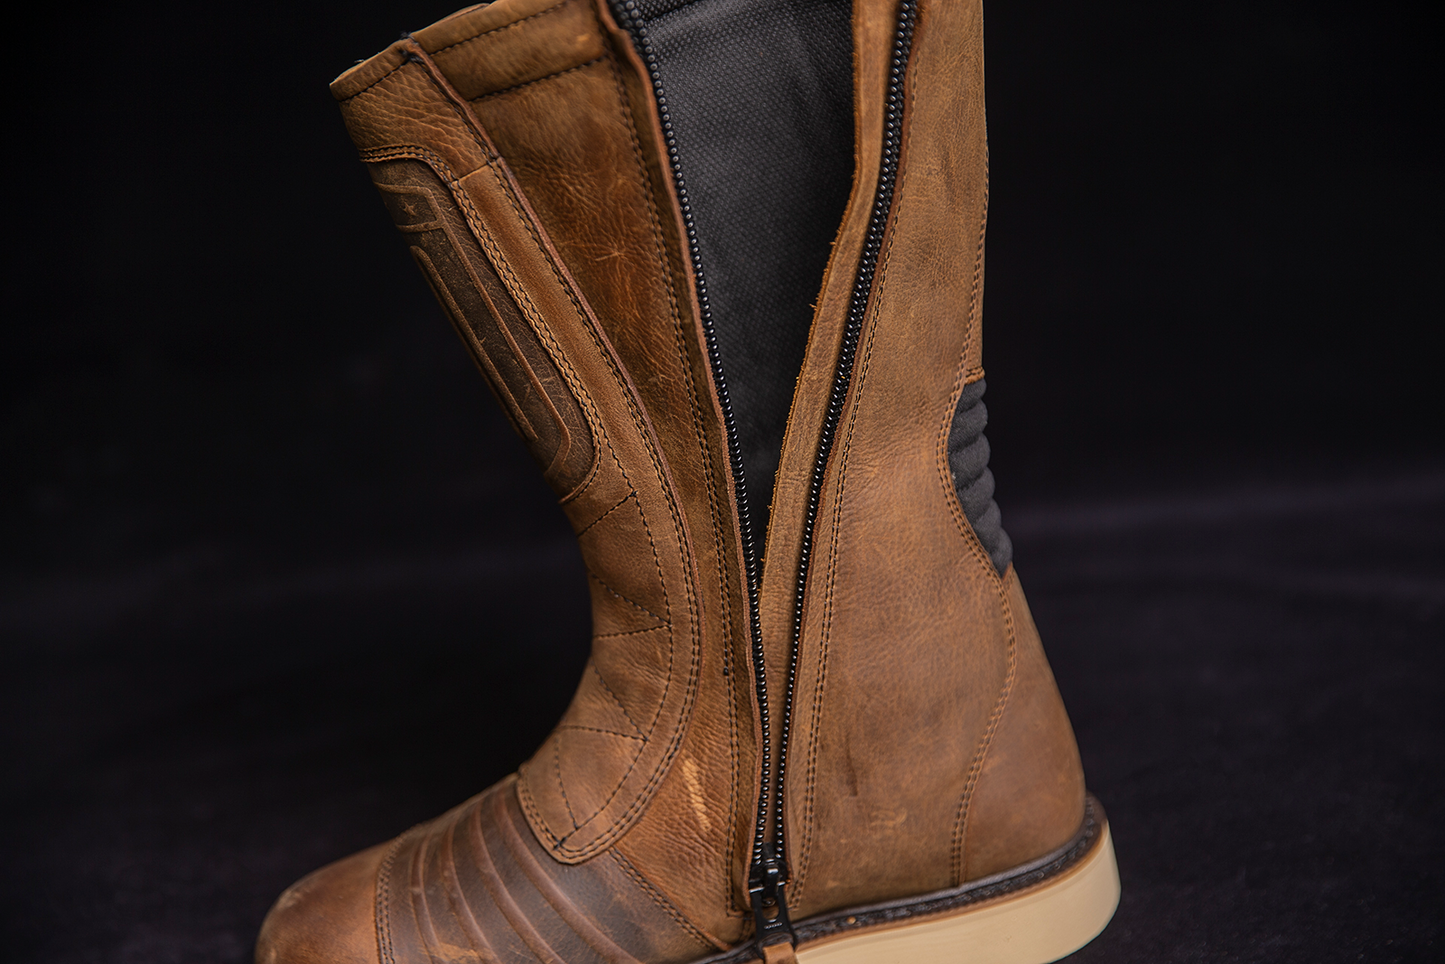 ICON Elsinore 2™ CE Boots - Brown - Size 8.5 3403-1222